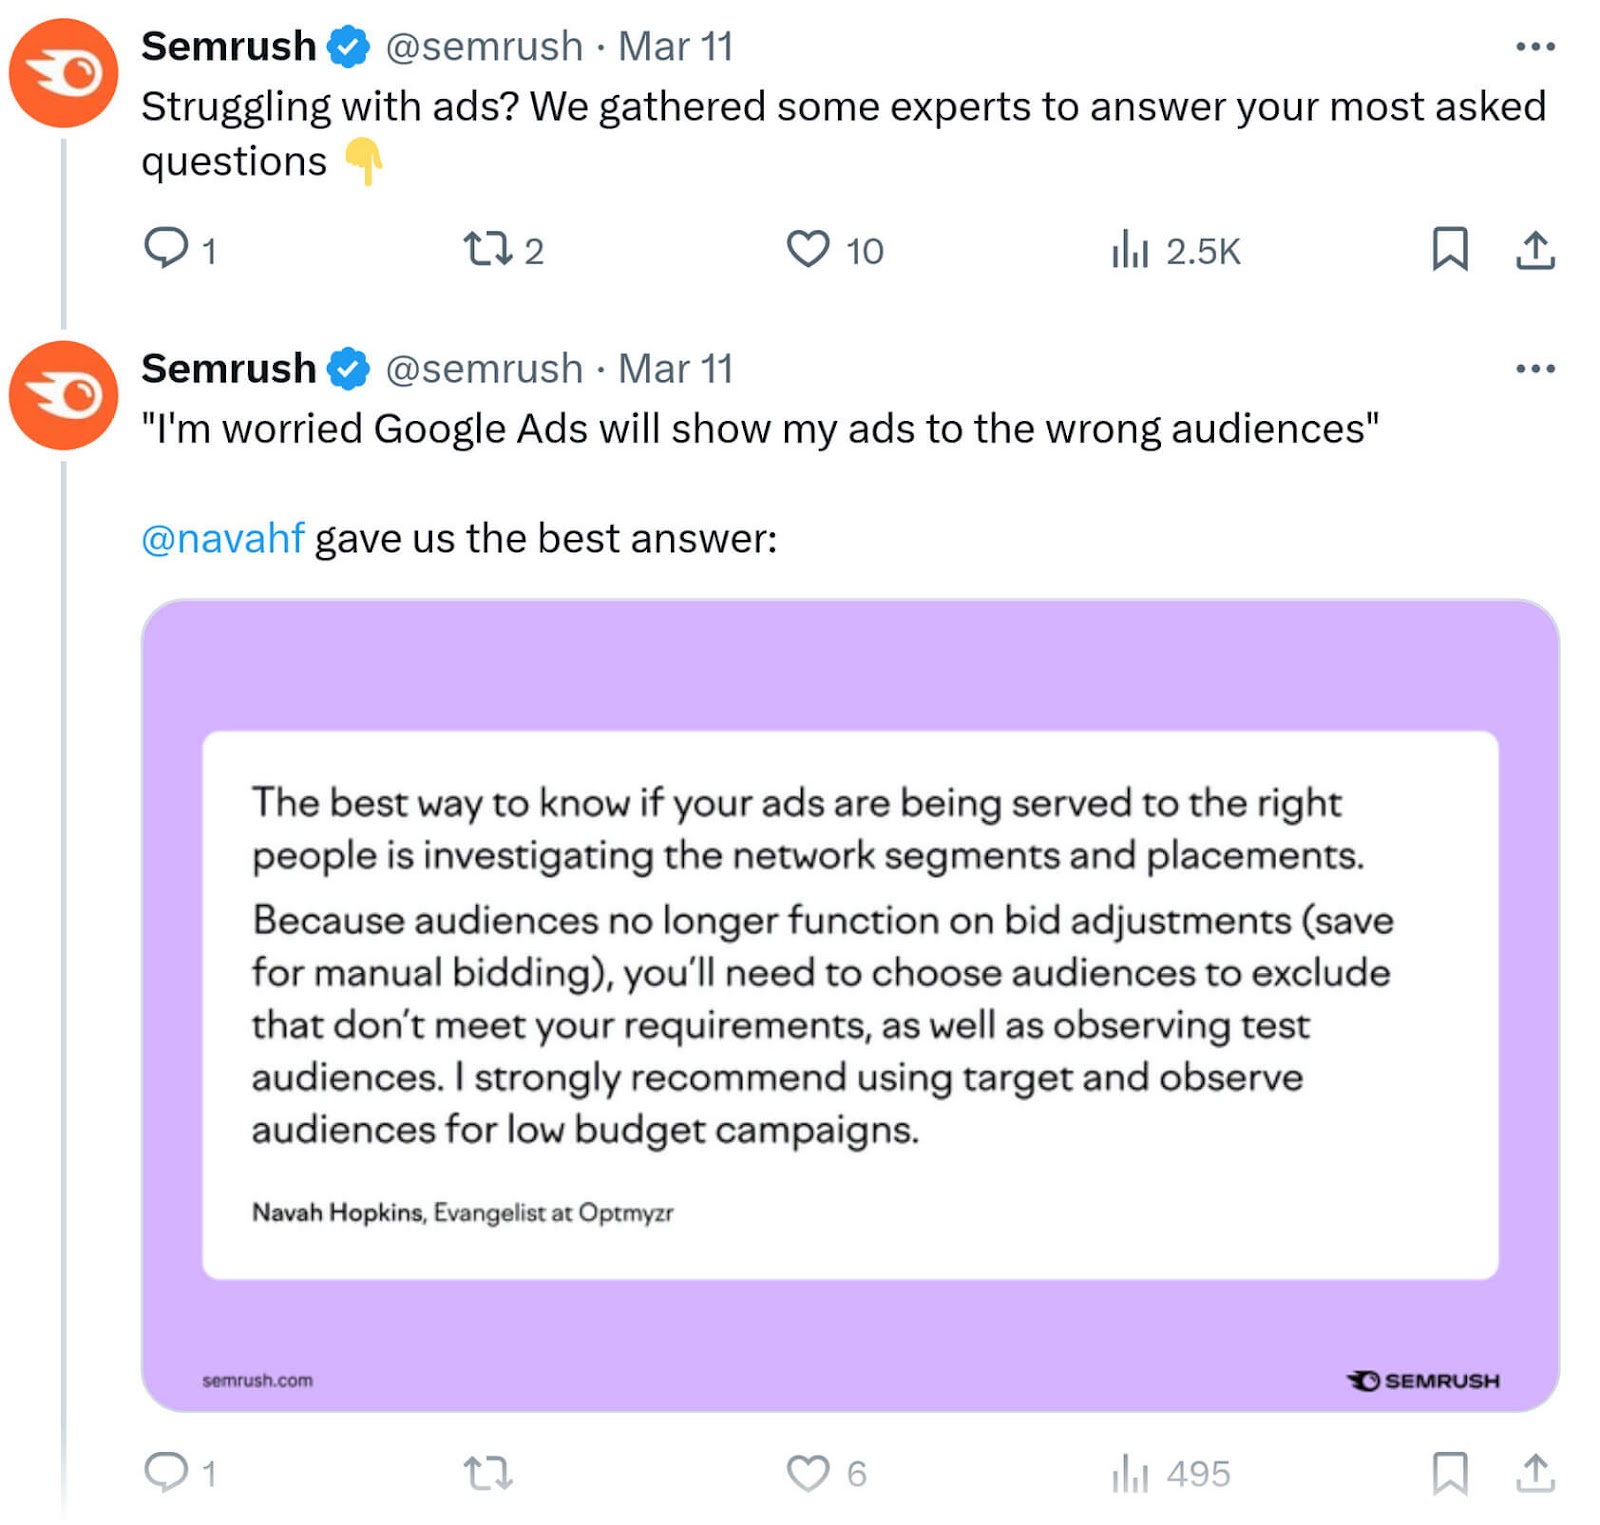 Twitter post by Semrush featuring a contributor's comment highlighted in a purple box.